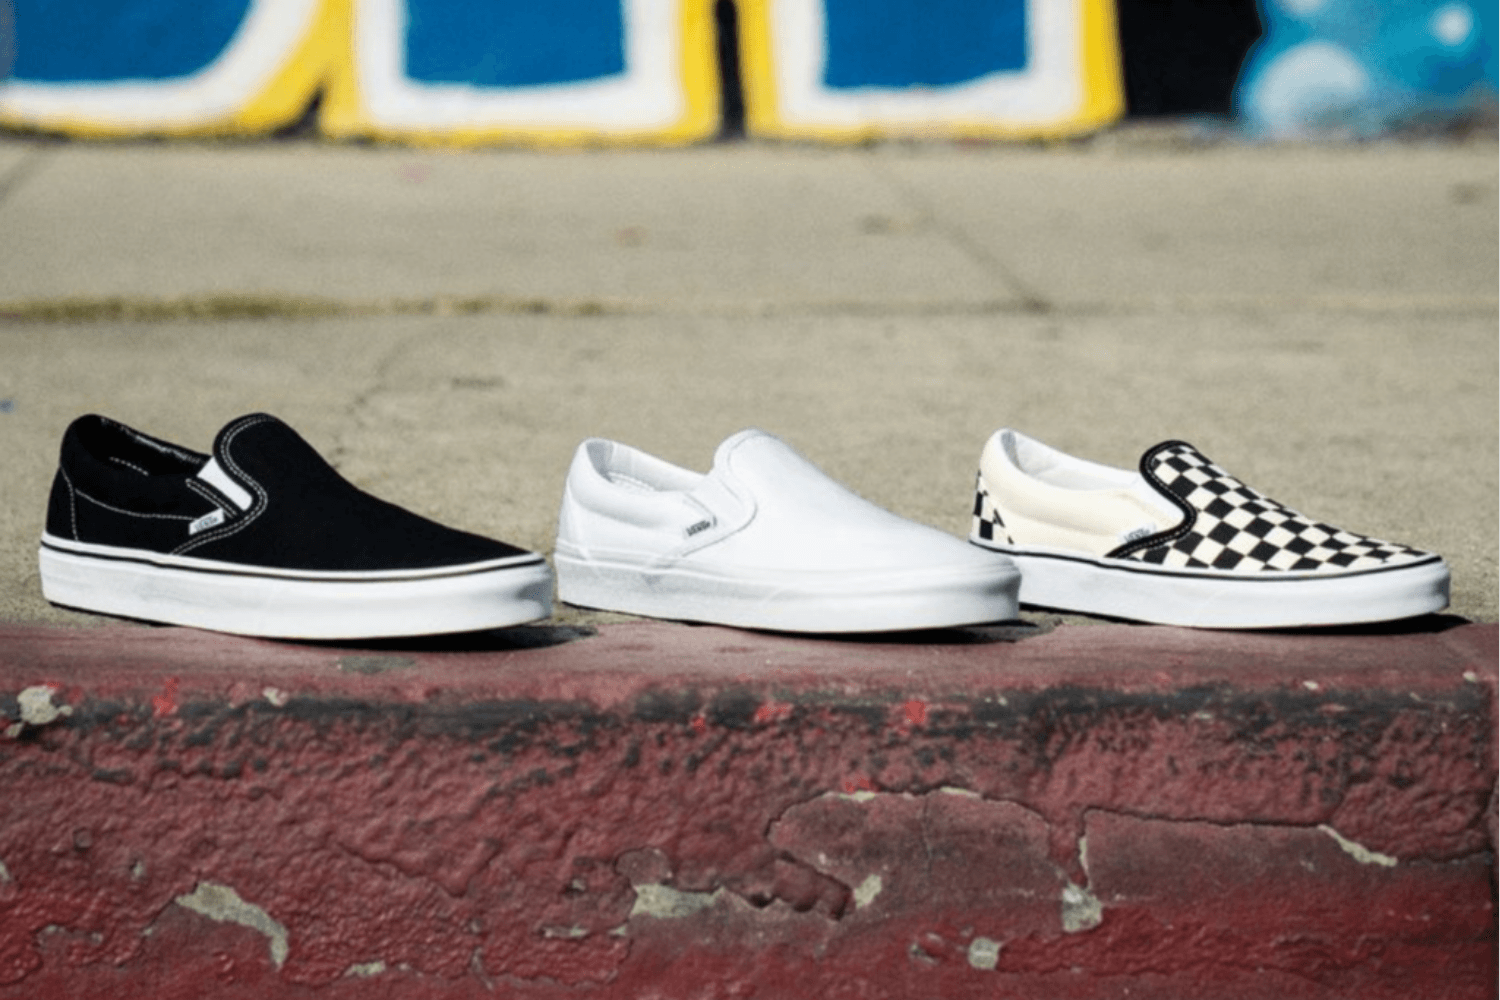 Save up to 50% in the big Vans Sale